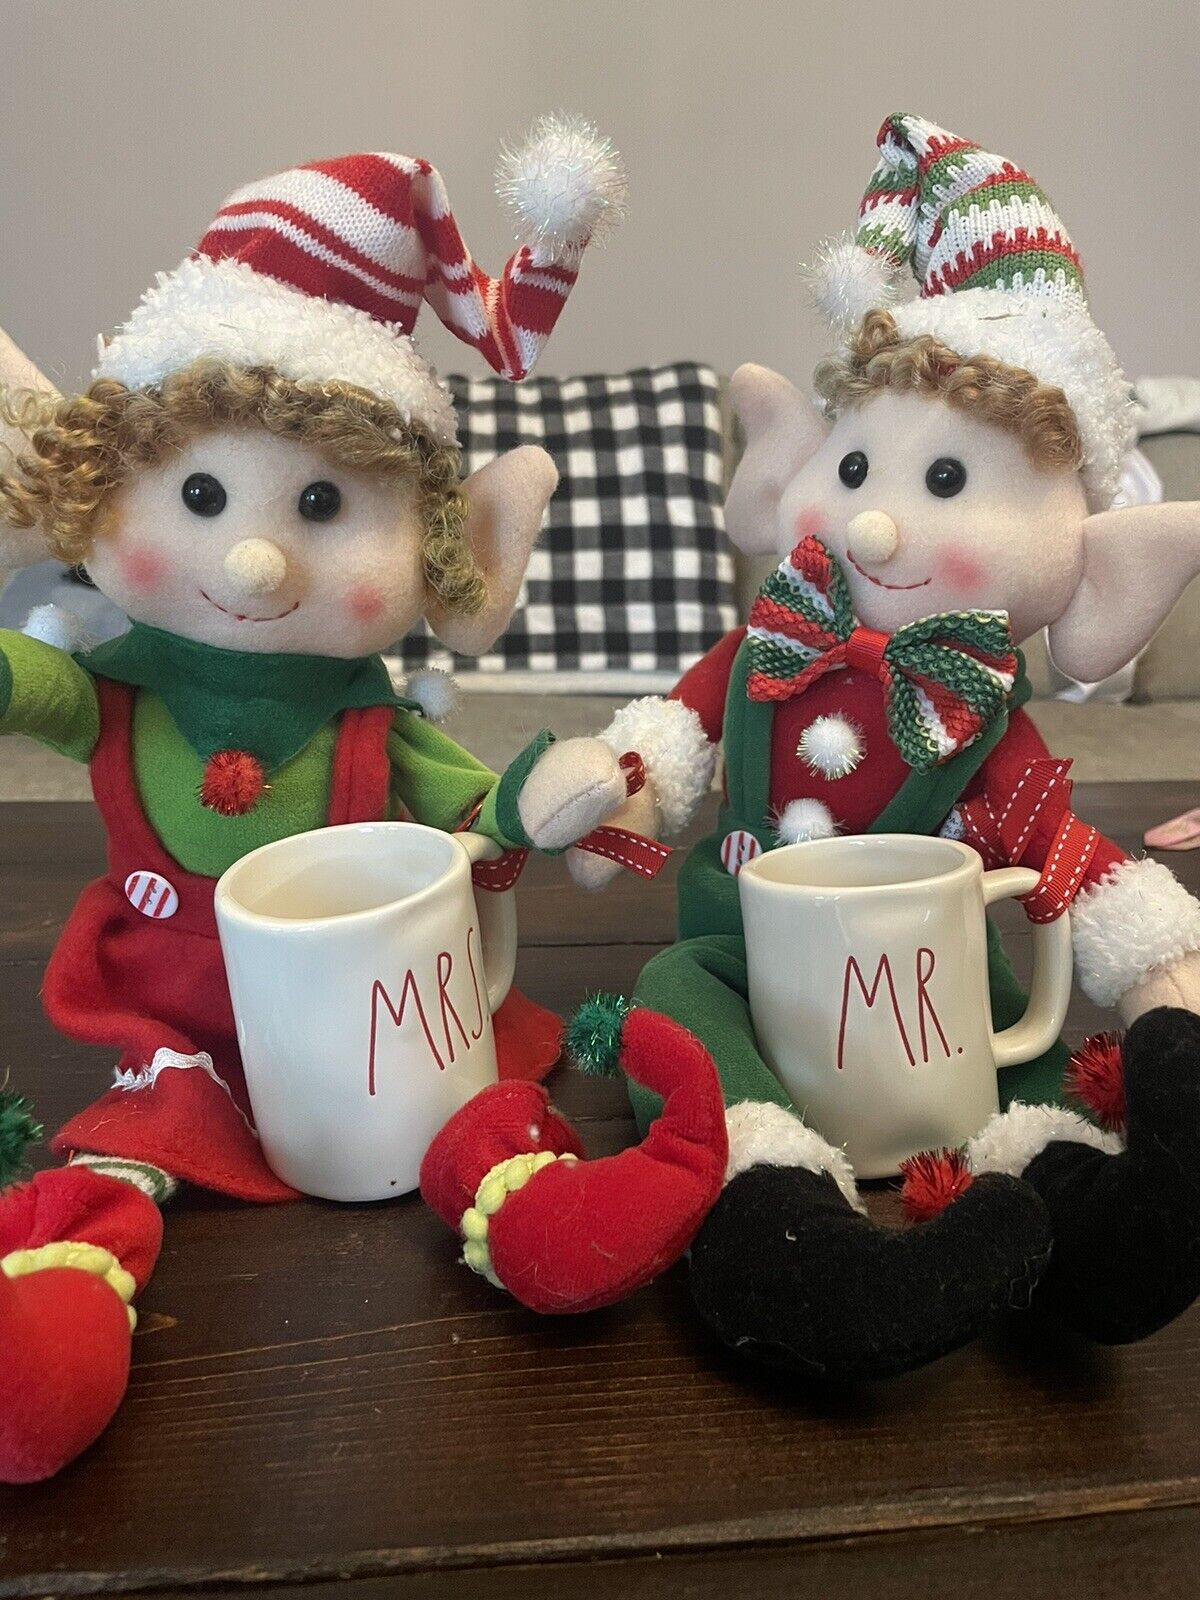 Christmas Elves With Rae dunn Mr & Mrs Mugs In Hand. Sold as A Set